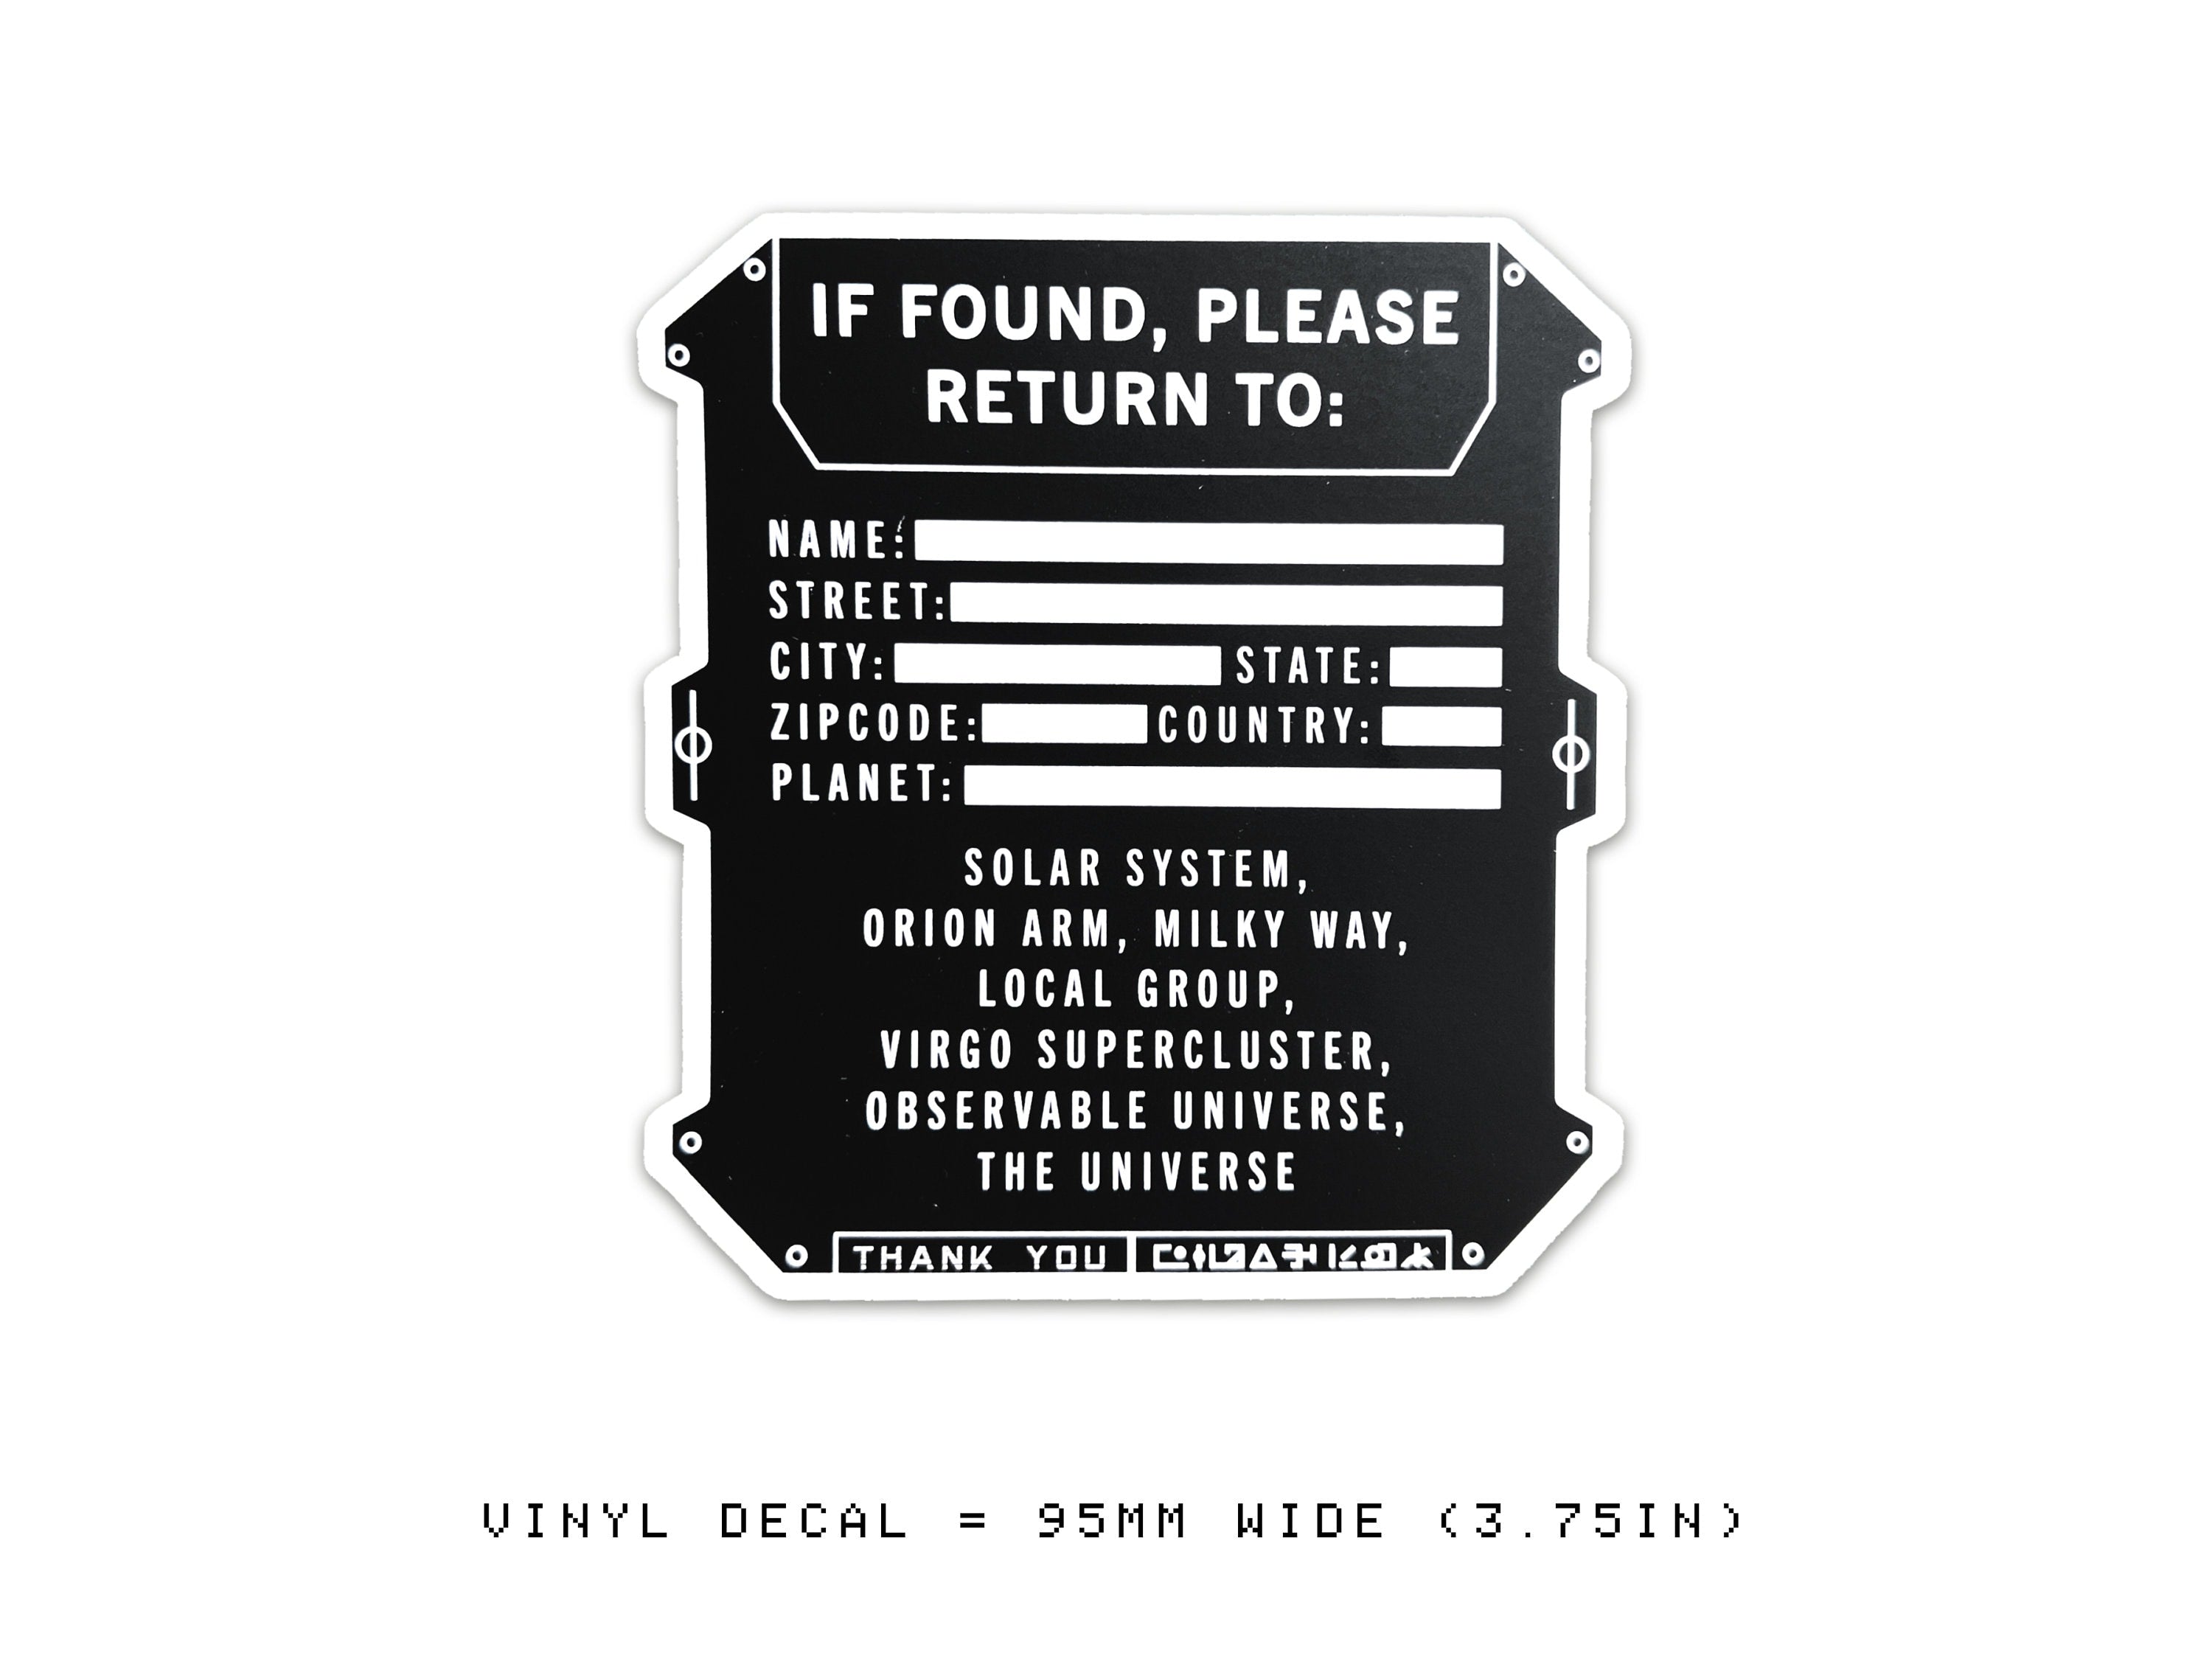 Cosmic Address Vinyl Decal - Sci-fi Cyberpunk / Astropunk Laptop Sticker - If Found (or if lost) Cargo Container Astronomy Decal